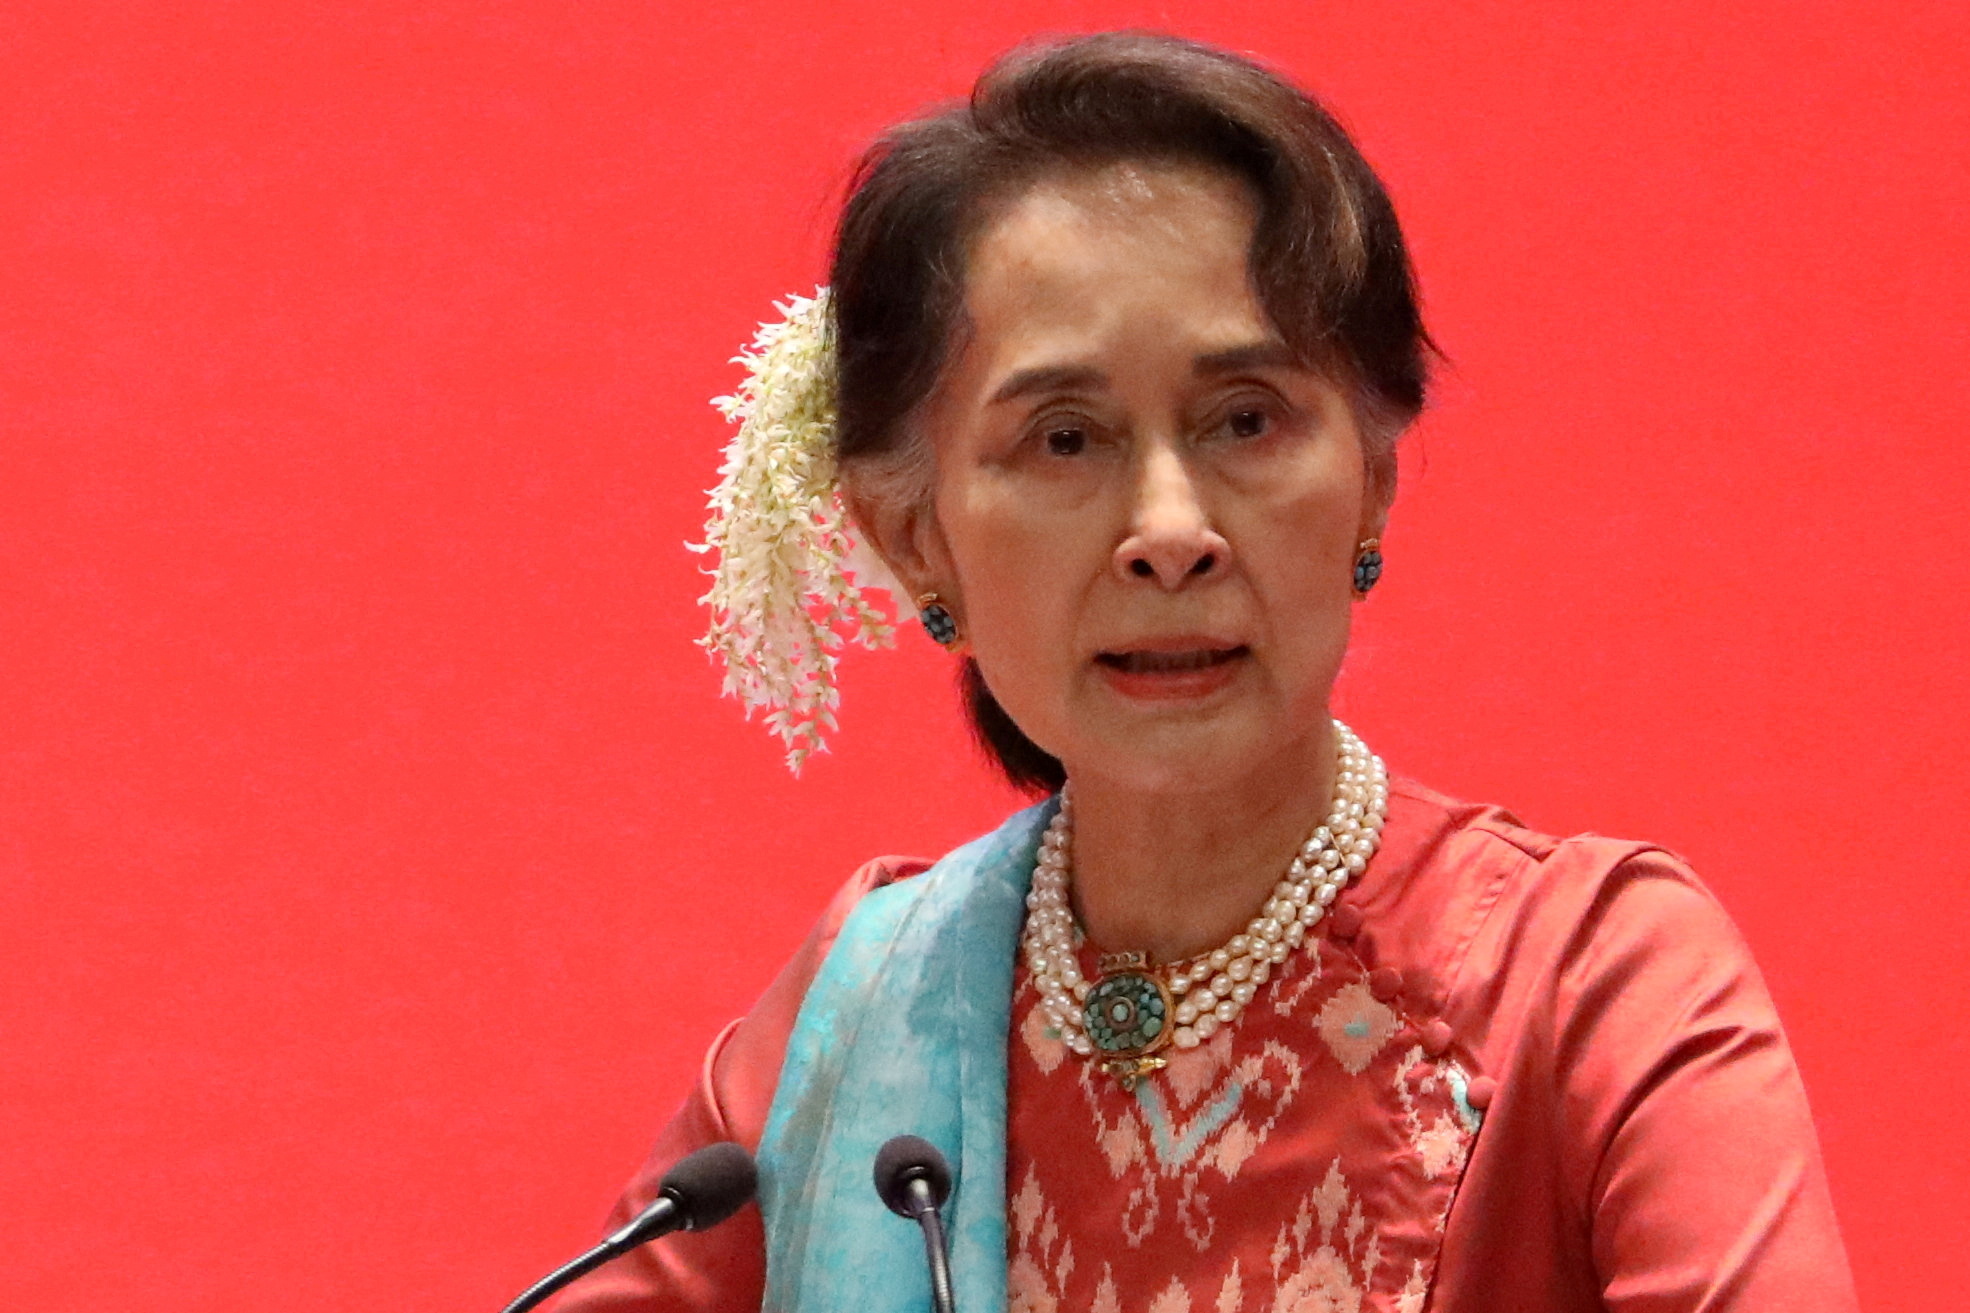 Myanmar's State Counsellor Aung San Suu Kyi attends Invest Myanmar in Naypyitaw